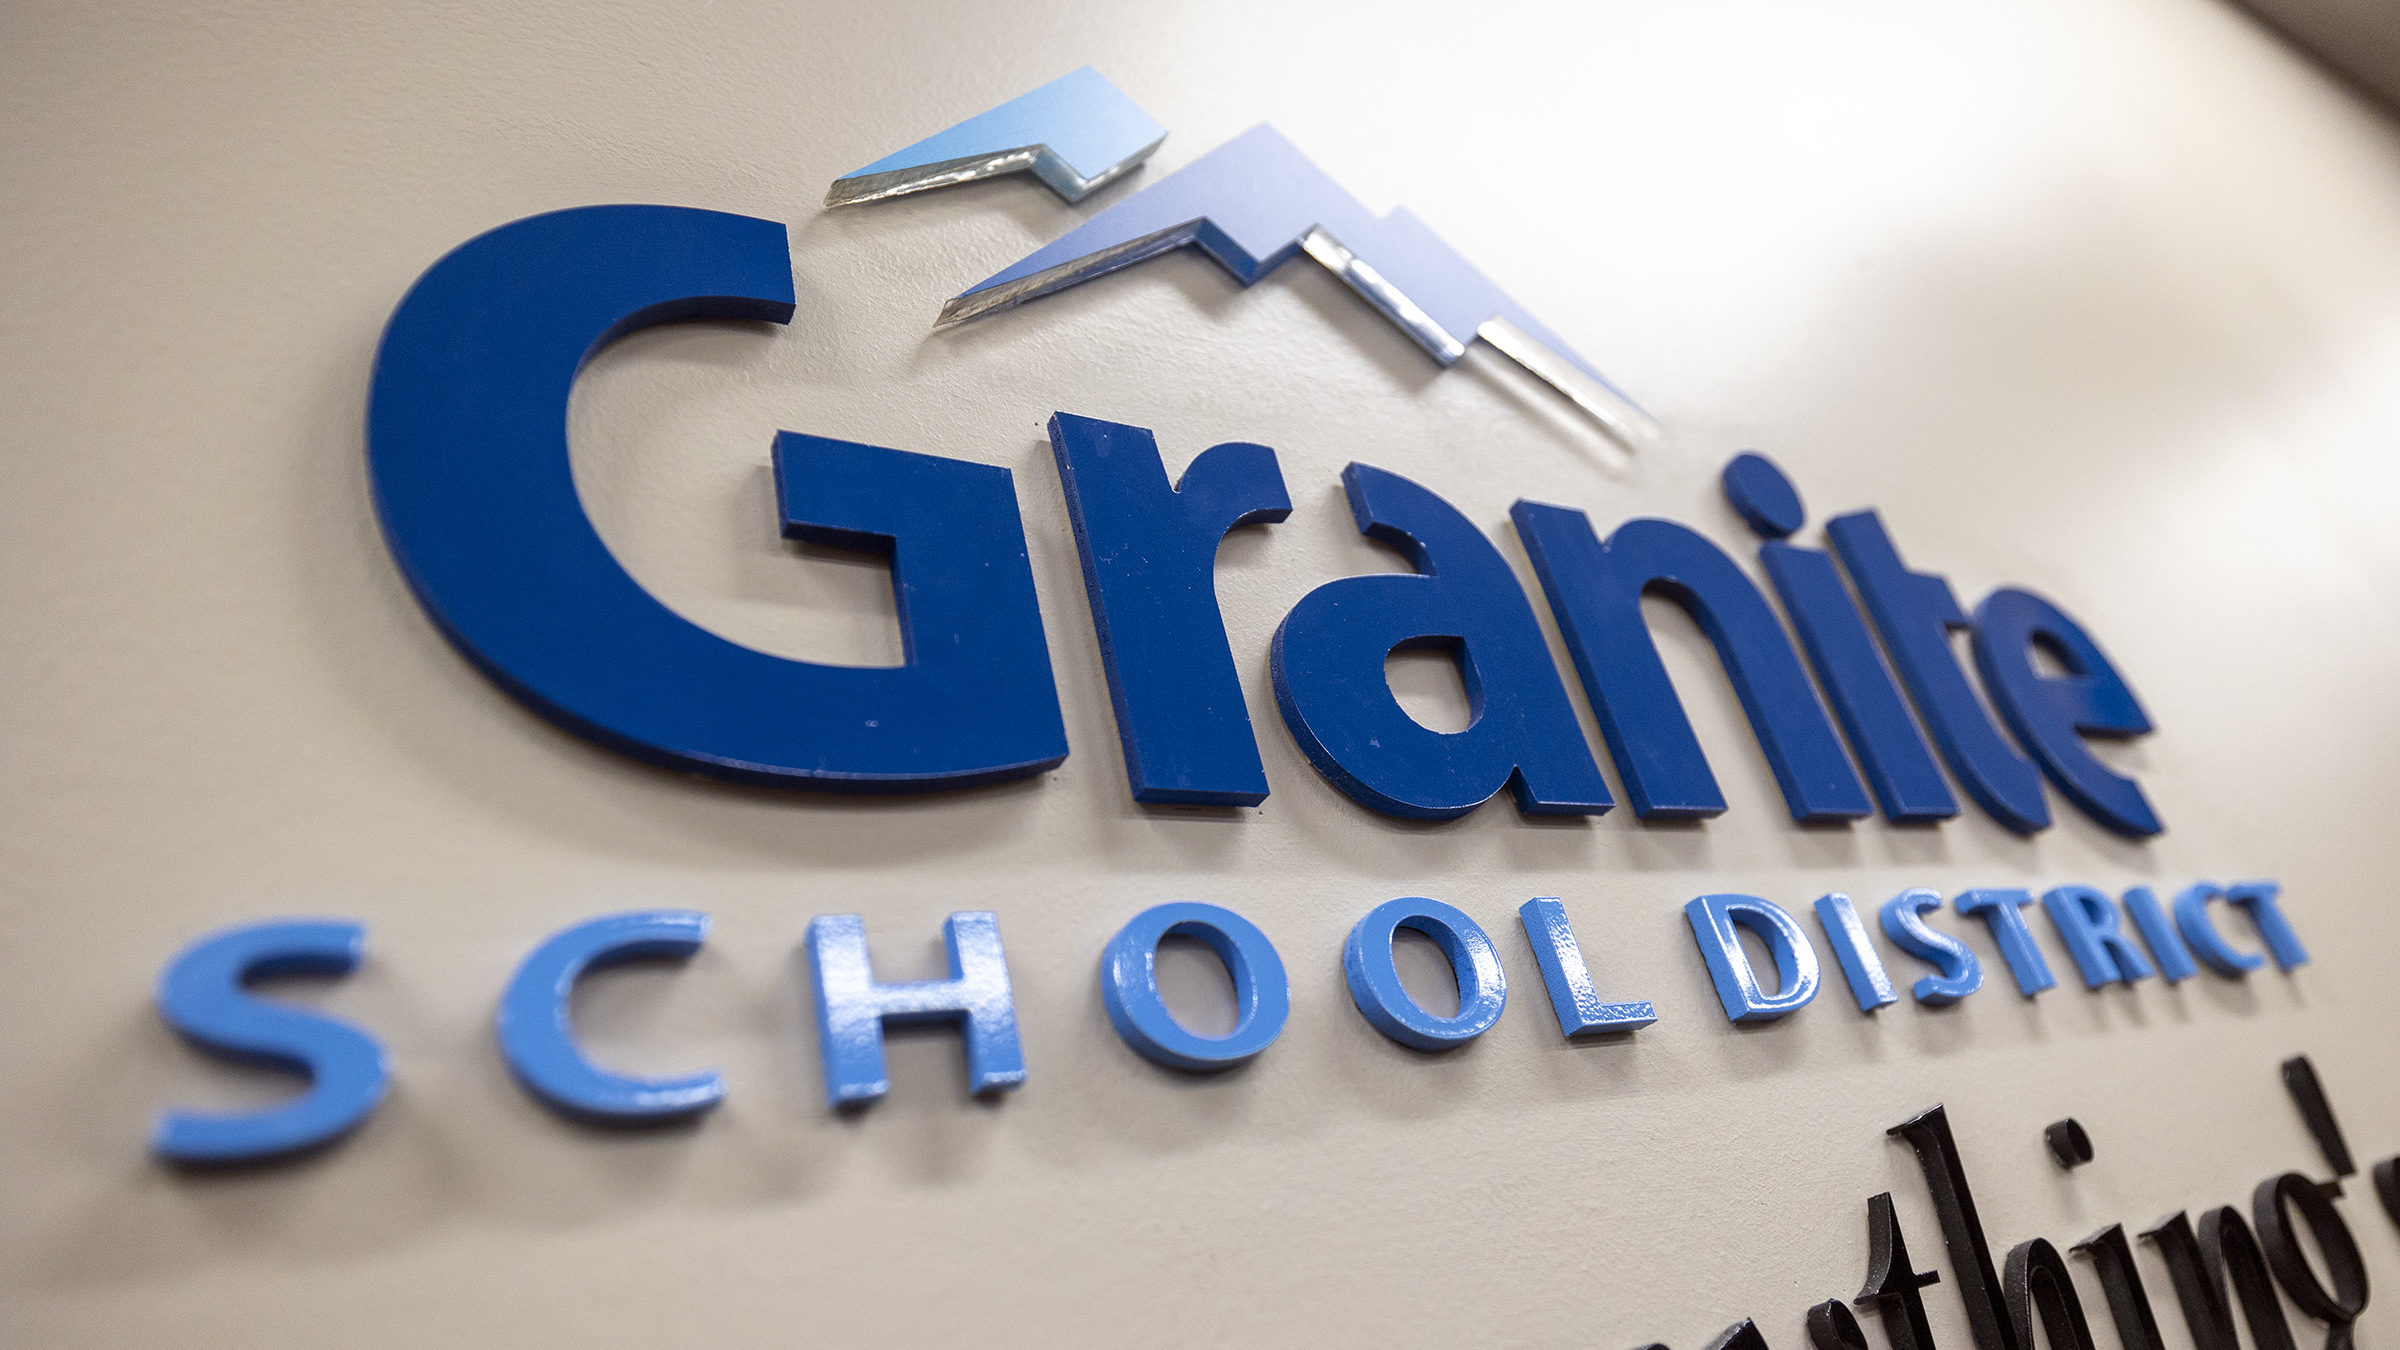 granite school district sign pictured, one of its principals will sleep on the roof...